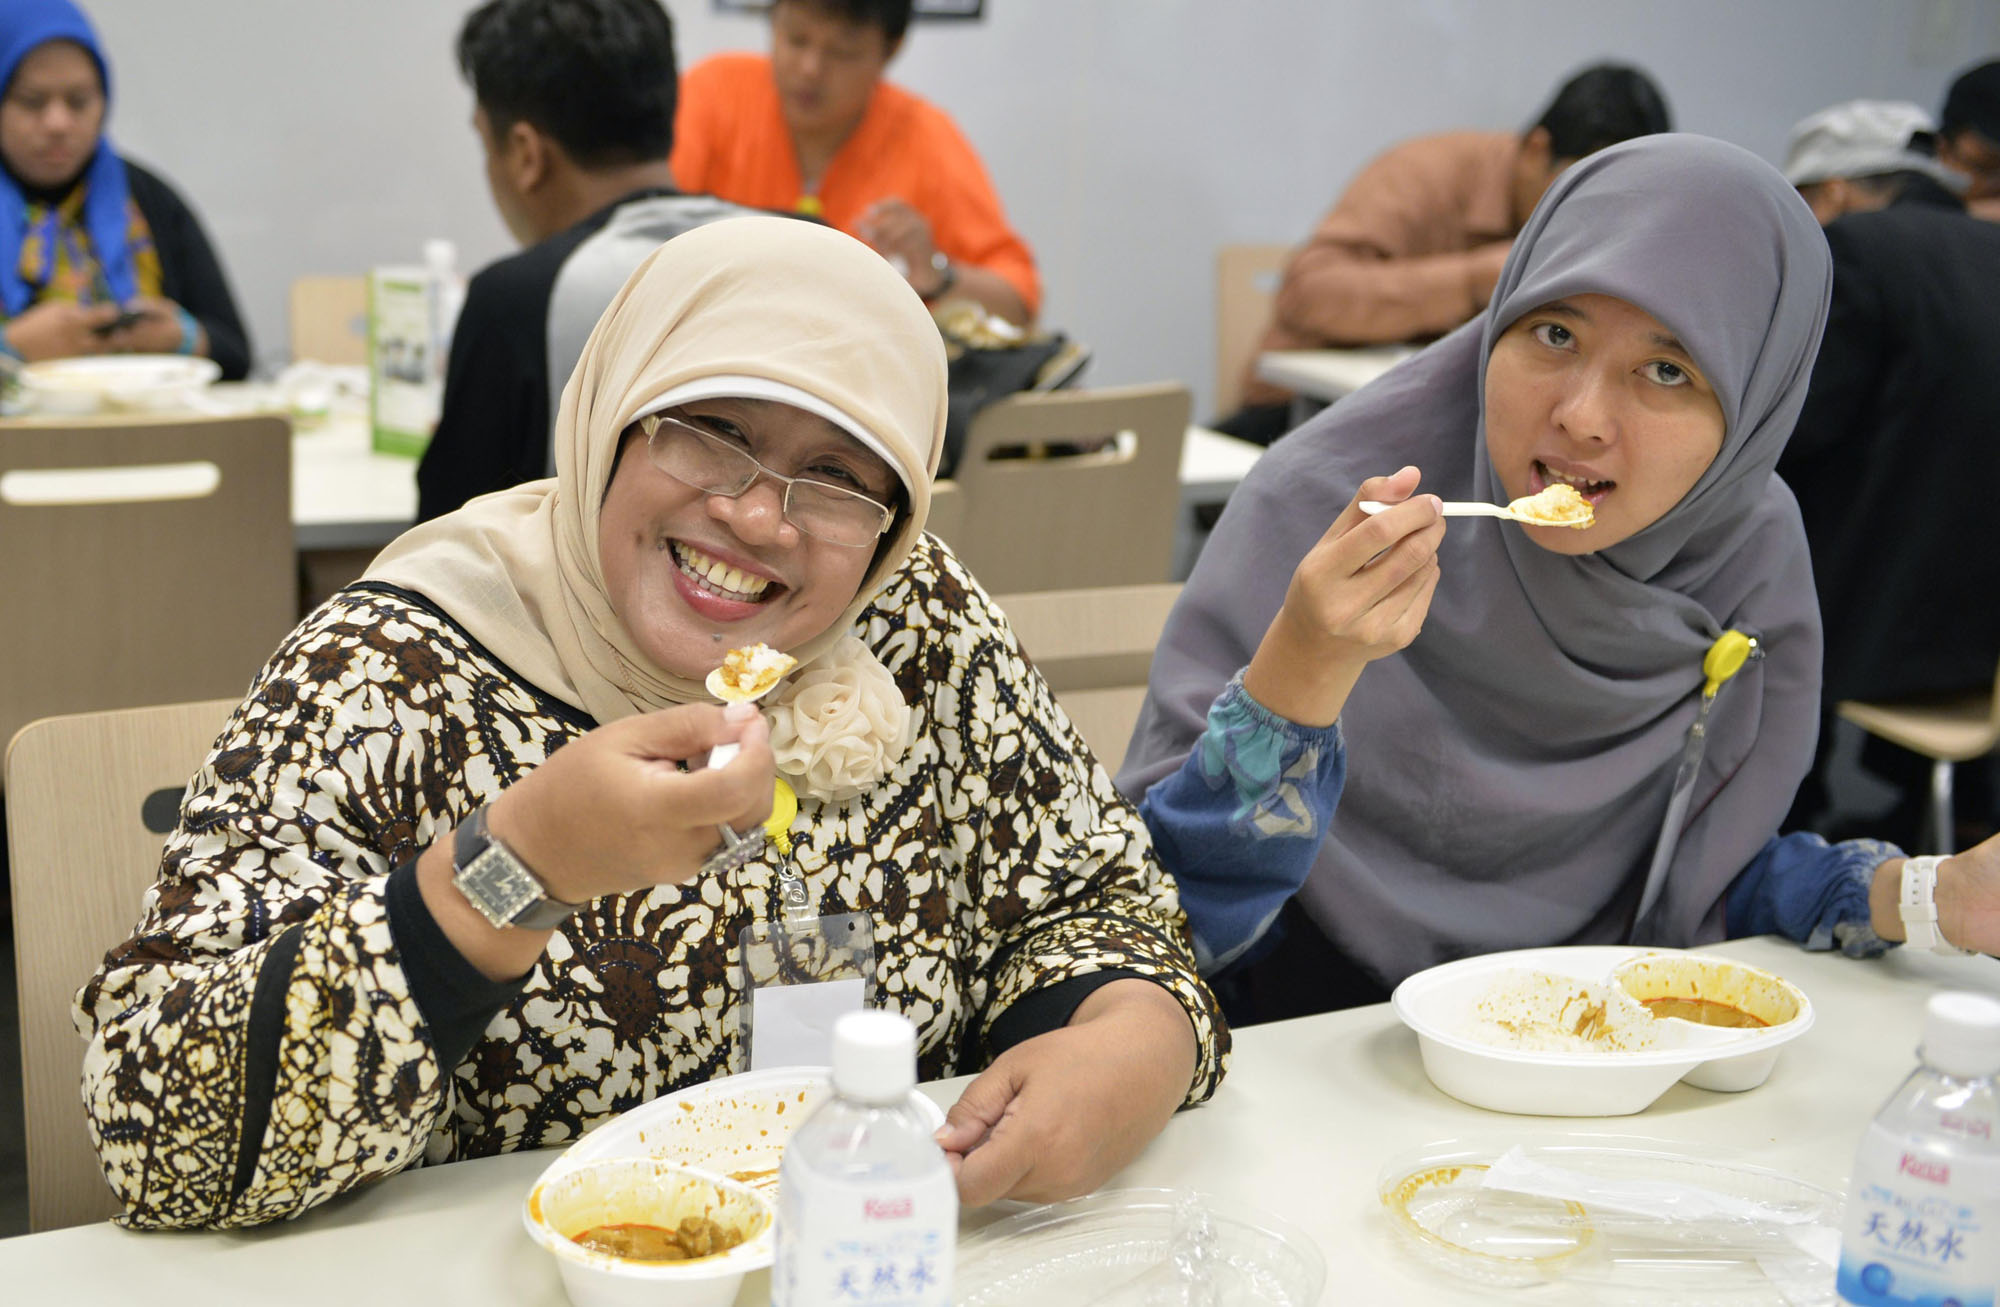 Happy together: Indonesian women eat halal lunches at a Tokyo university in June 2013. | KYODO